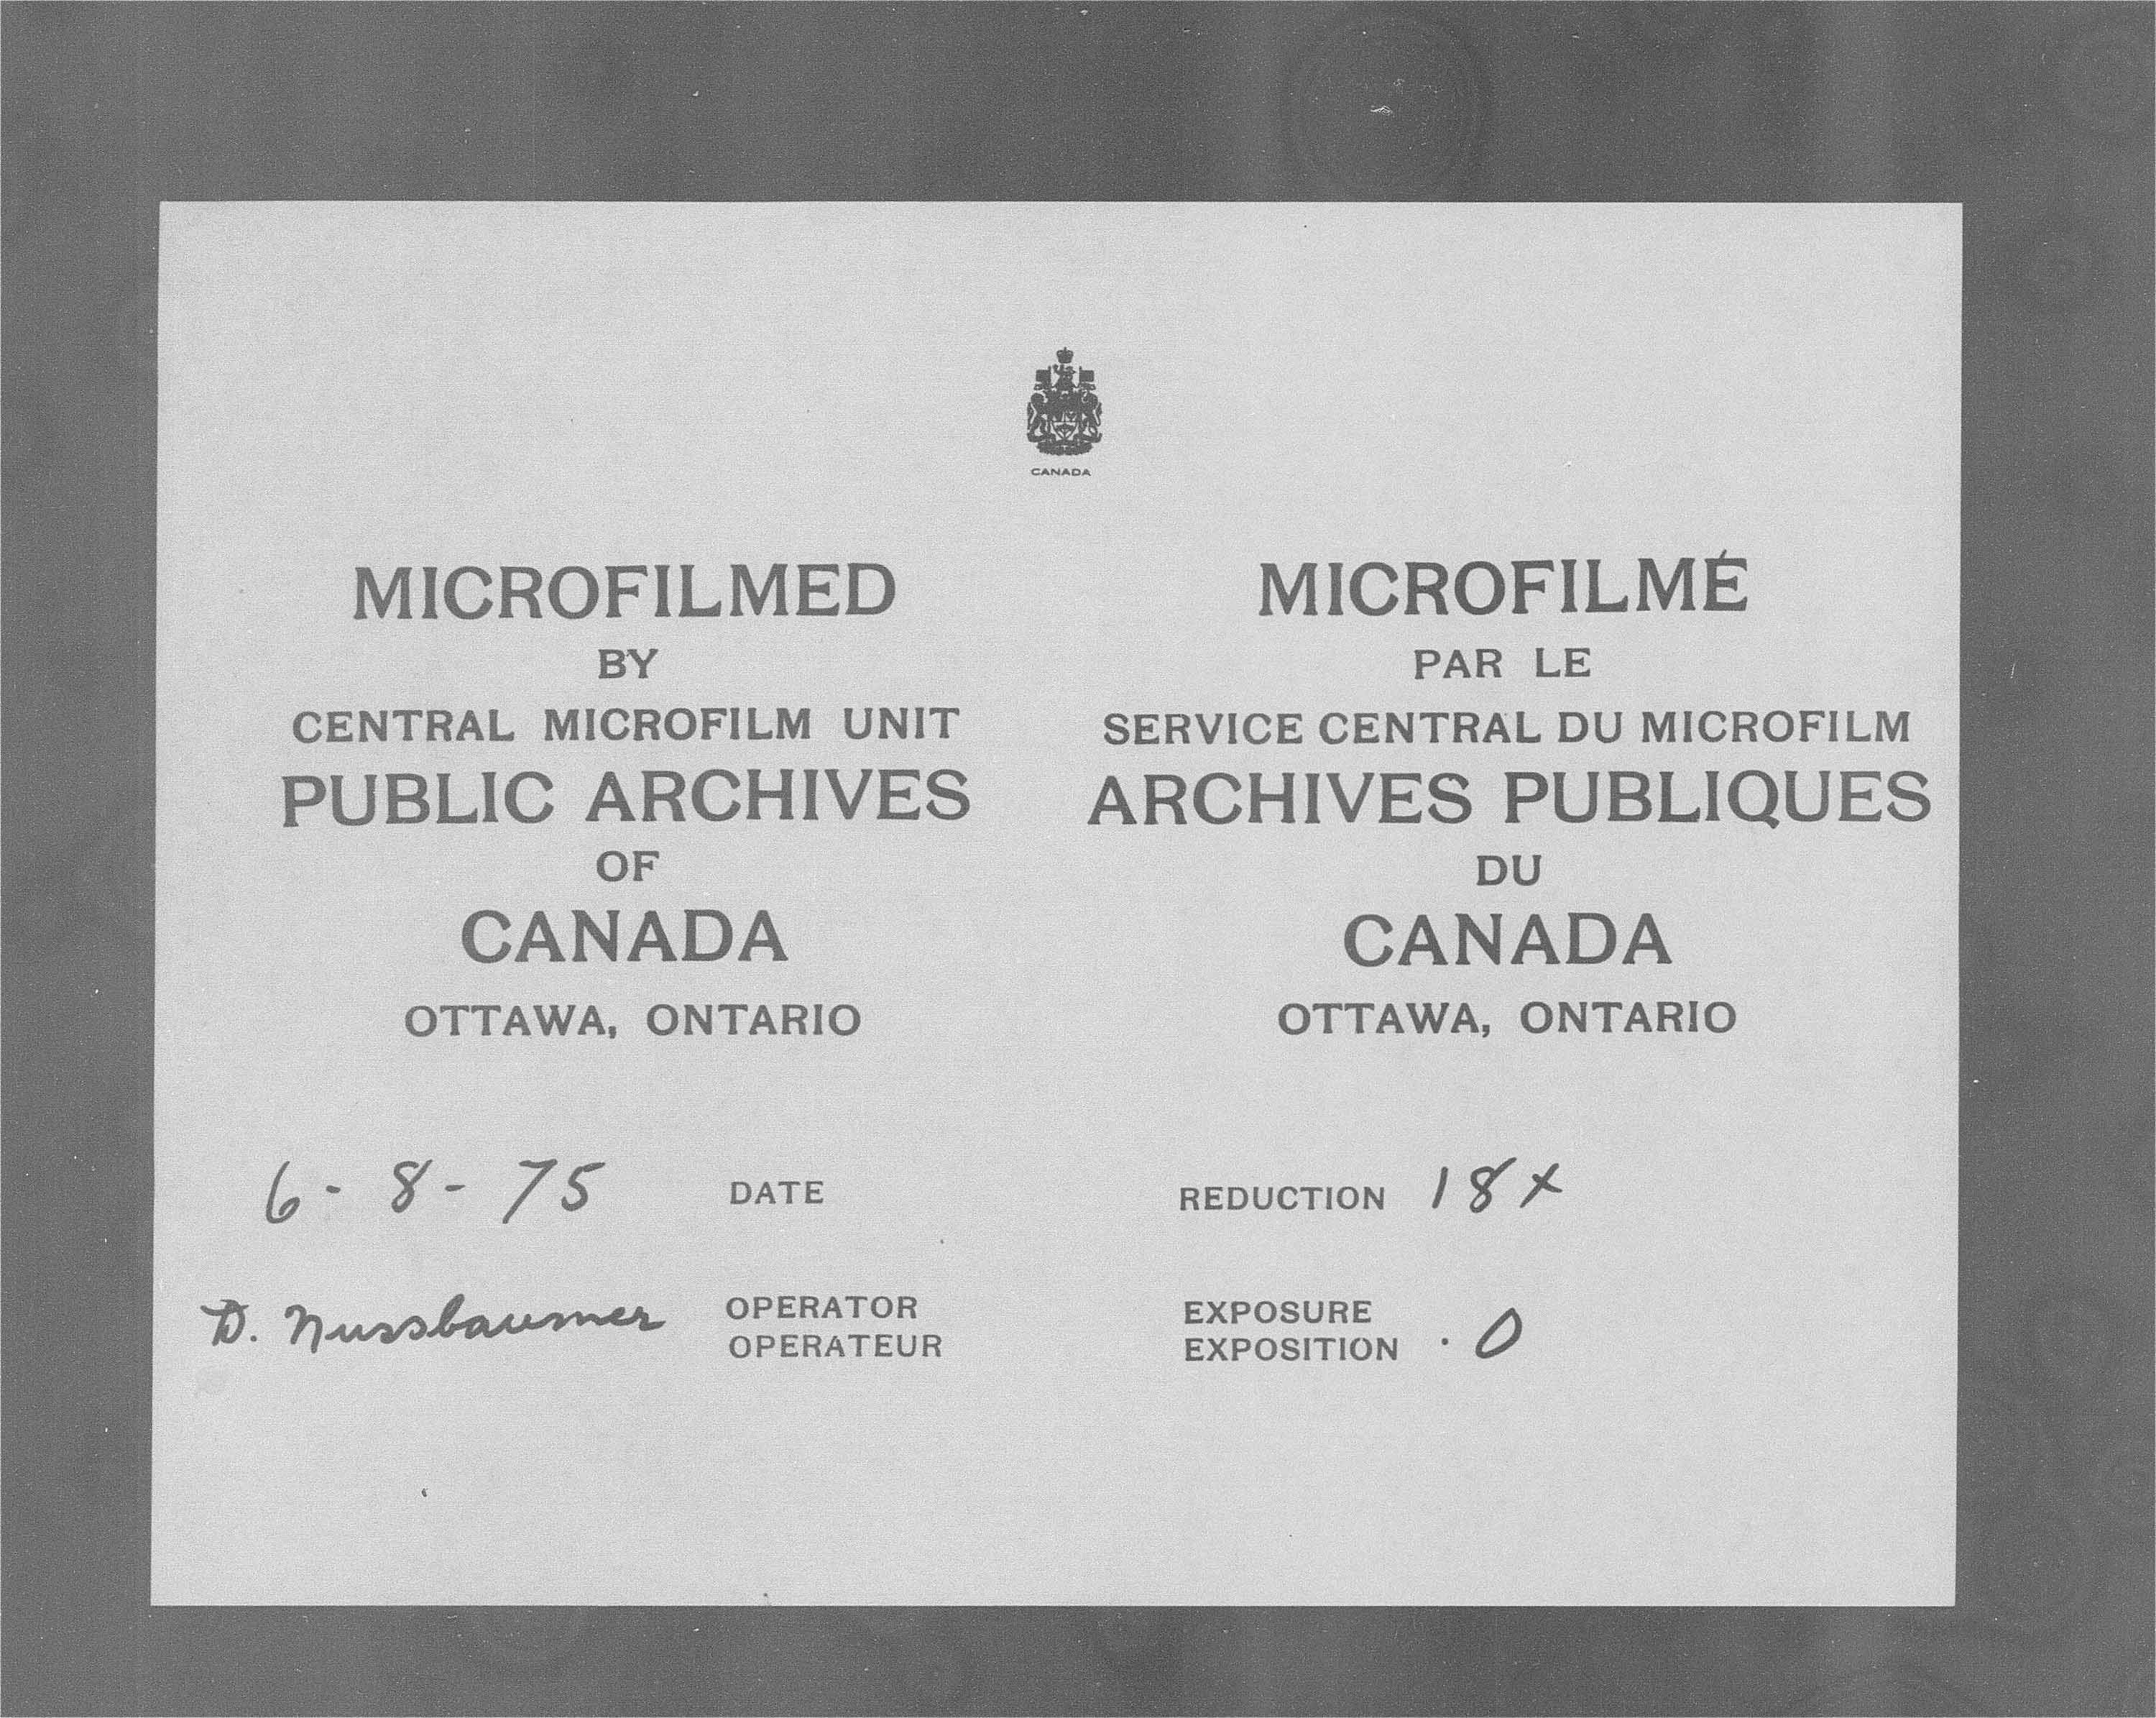 Title: Census of Canada, 1871 - Mikan Number: 142105 - Microform: c-9894